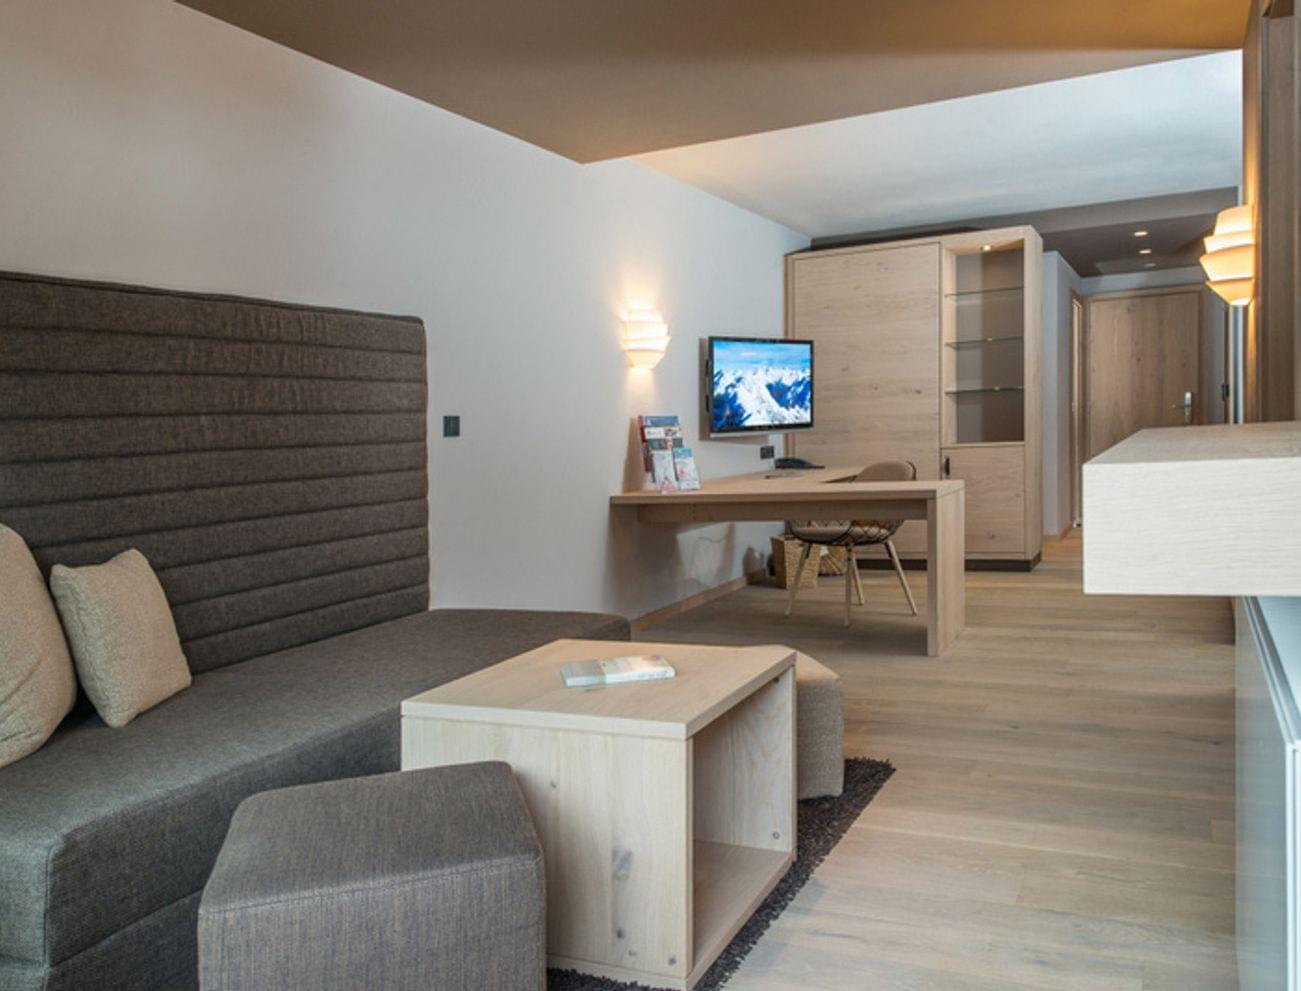 Hammerspitze apartment at the Alphotel